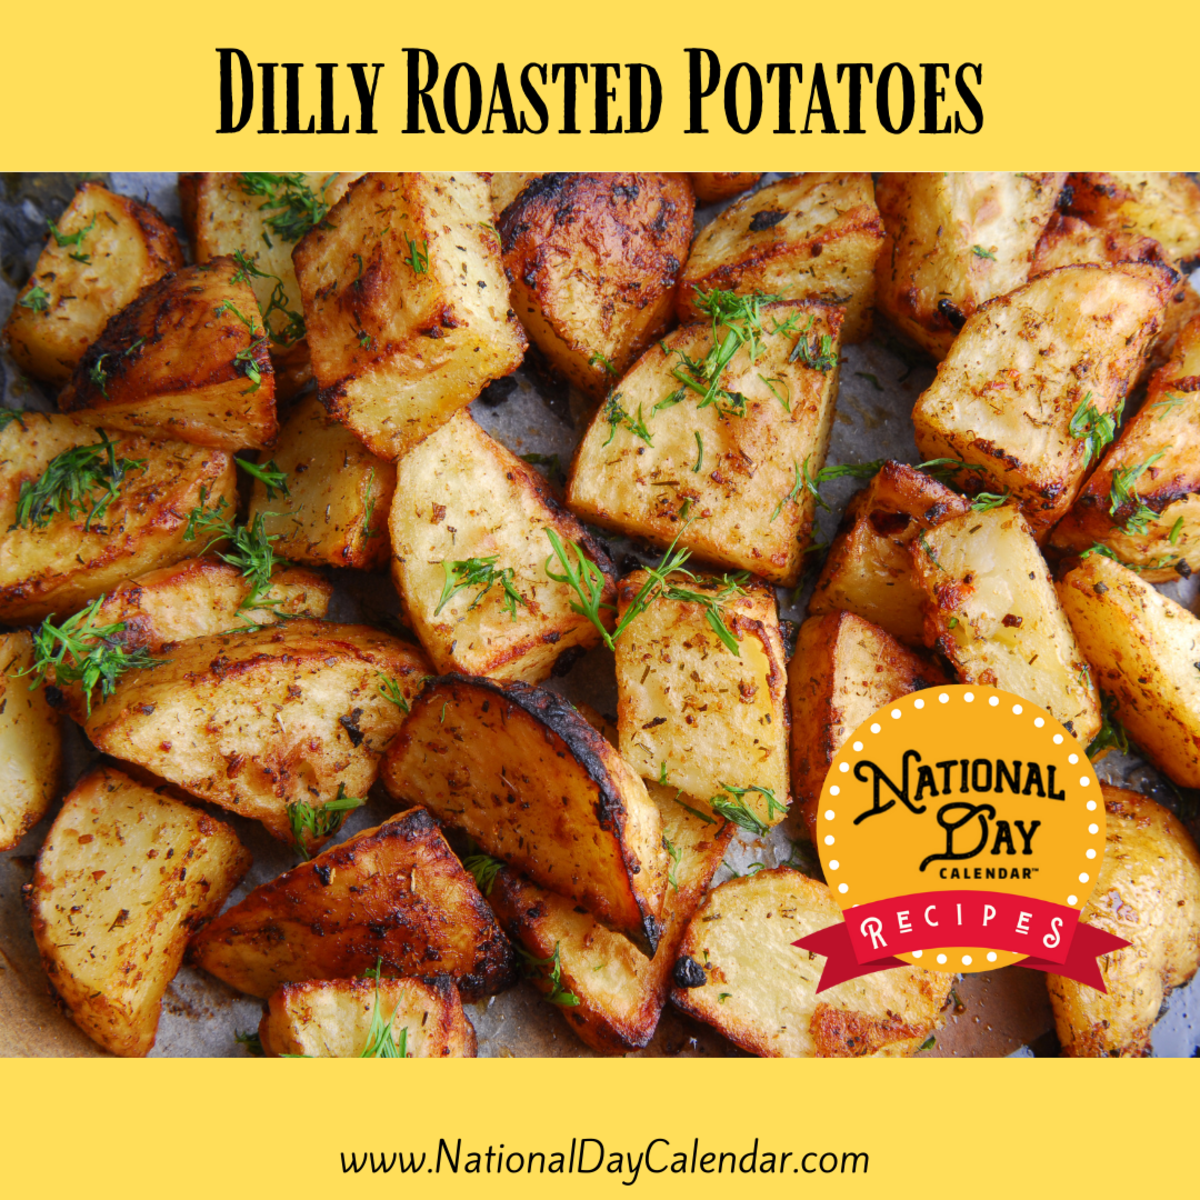 Dilly Roasted Potatoes